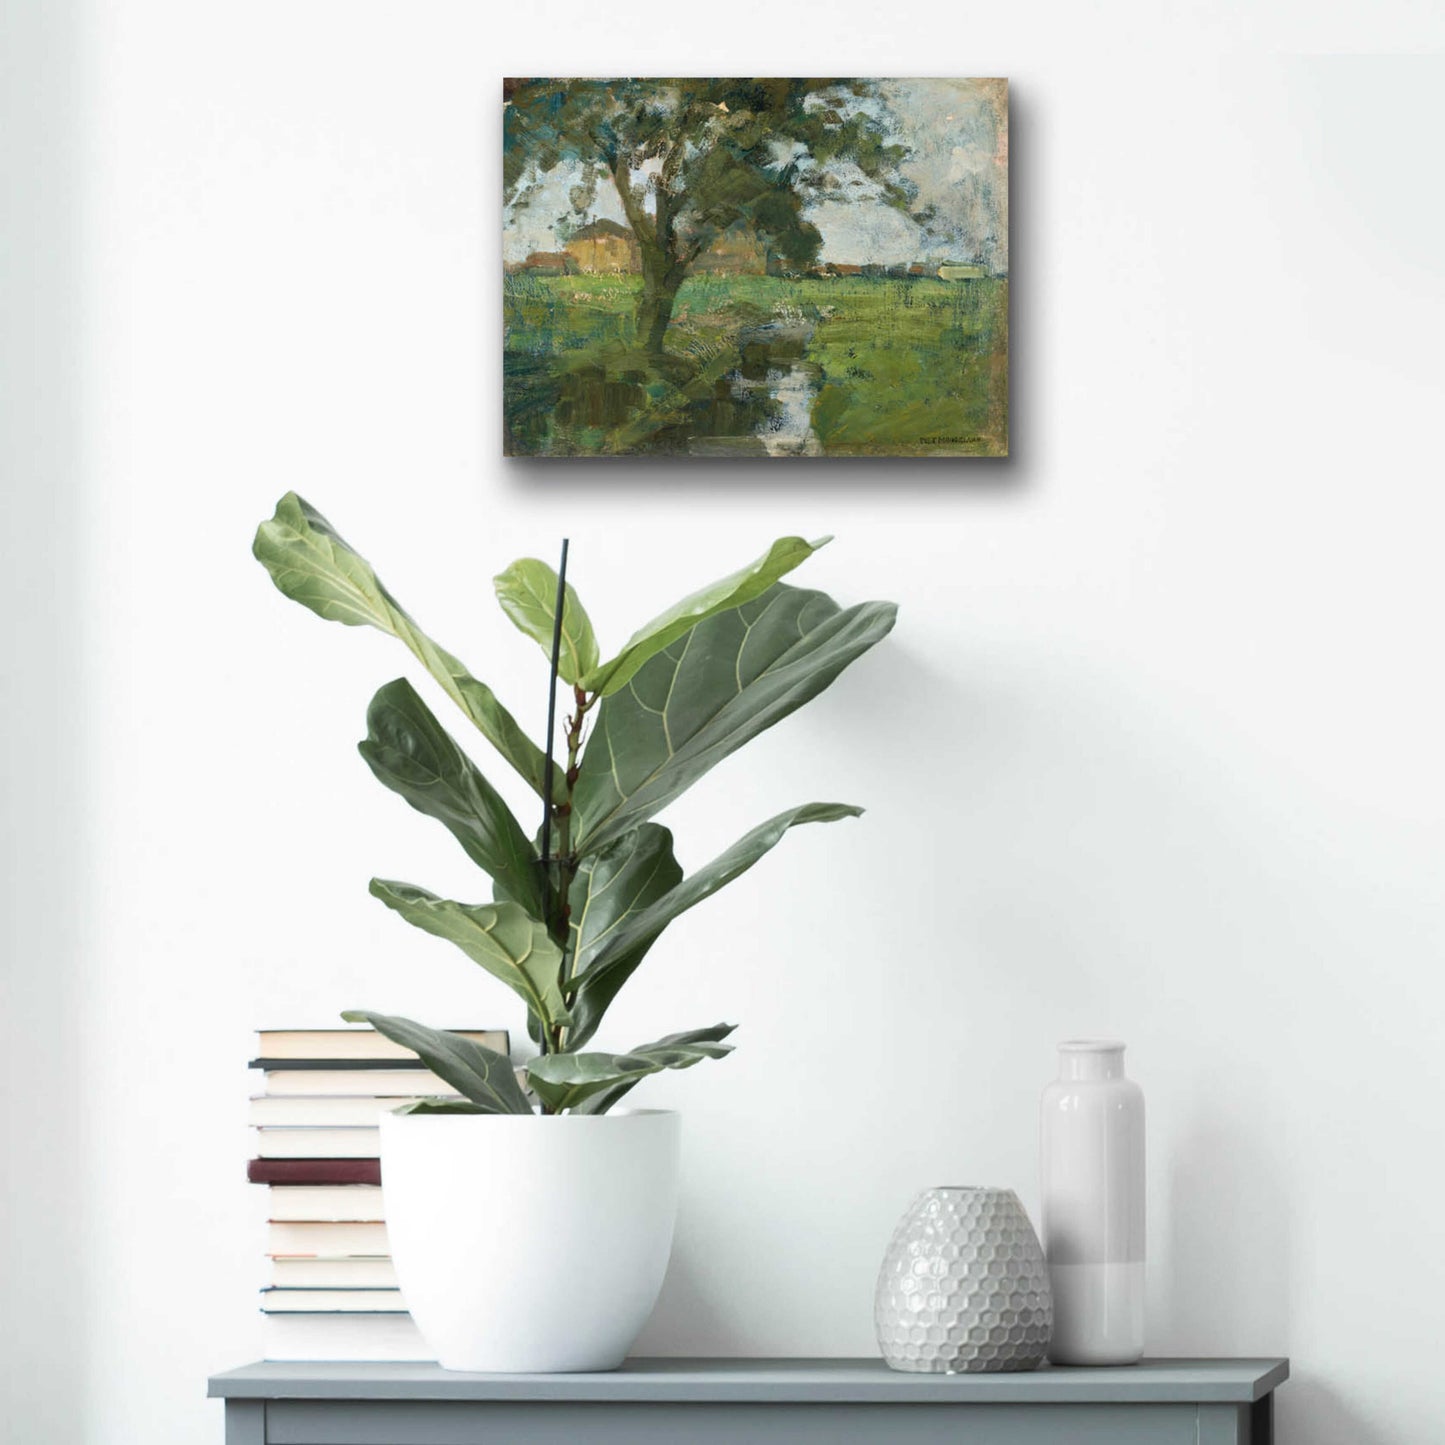 Epic Art 'Farm Settin with Foreground tree and Irrigation Ditch, 1900' by Piet Mondrian, Acrylic Glass Wall Art,16x12